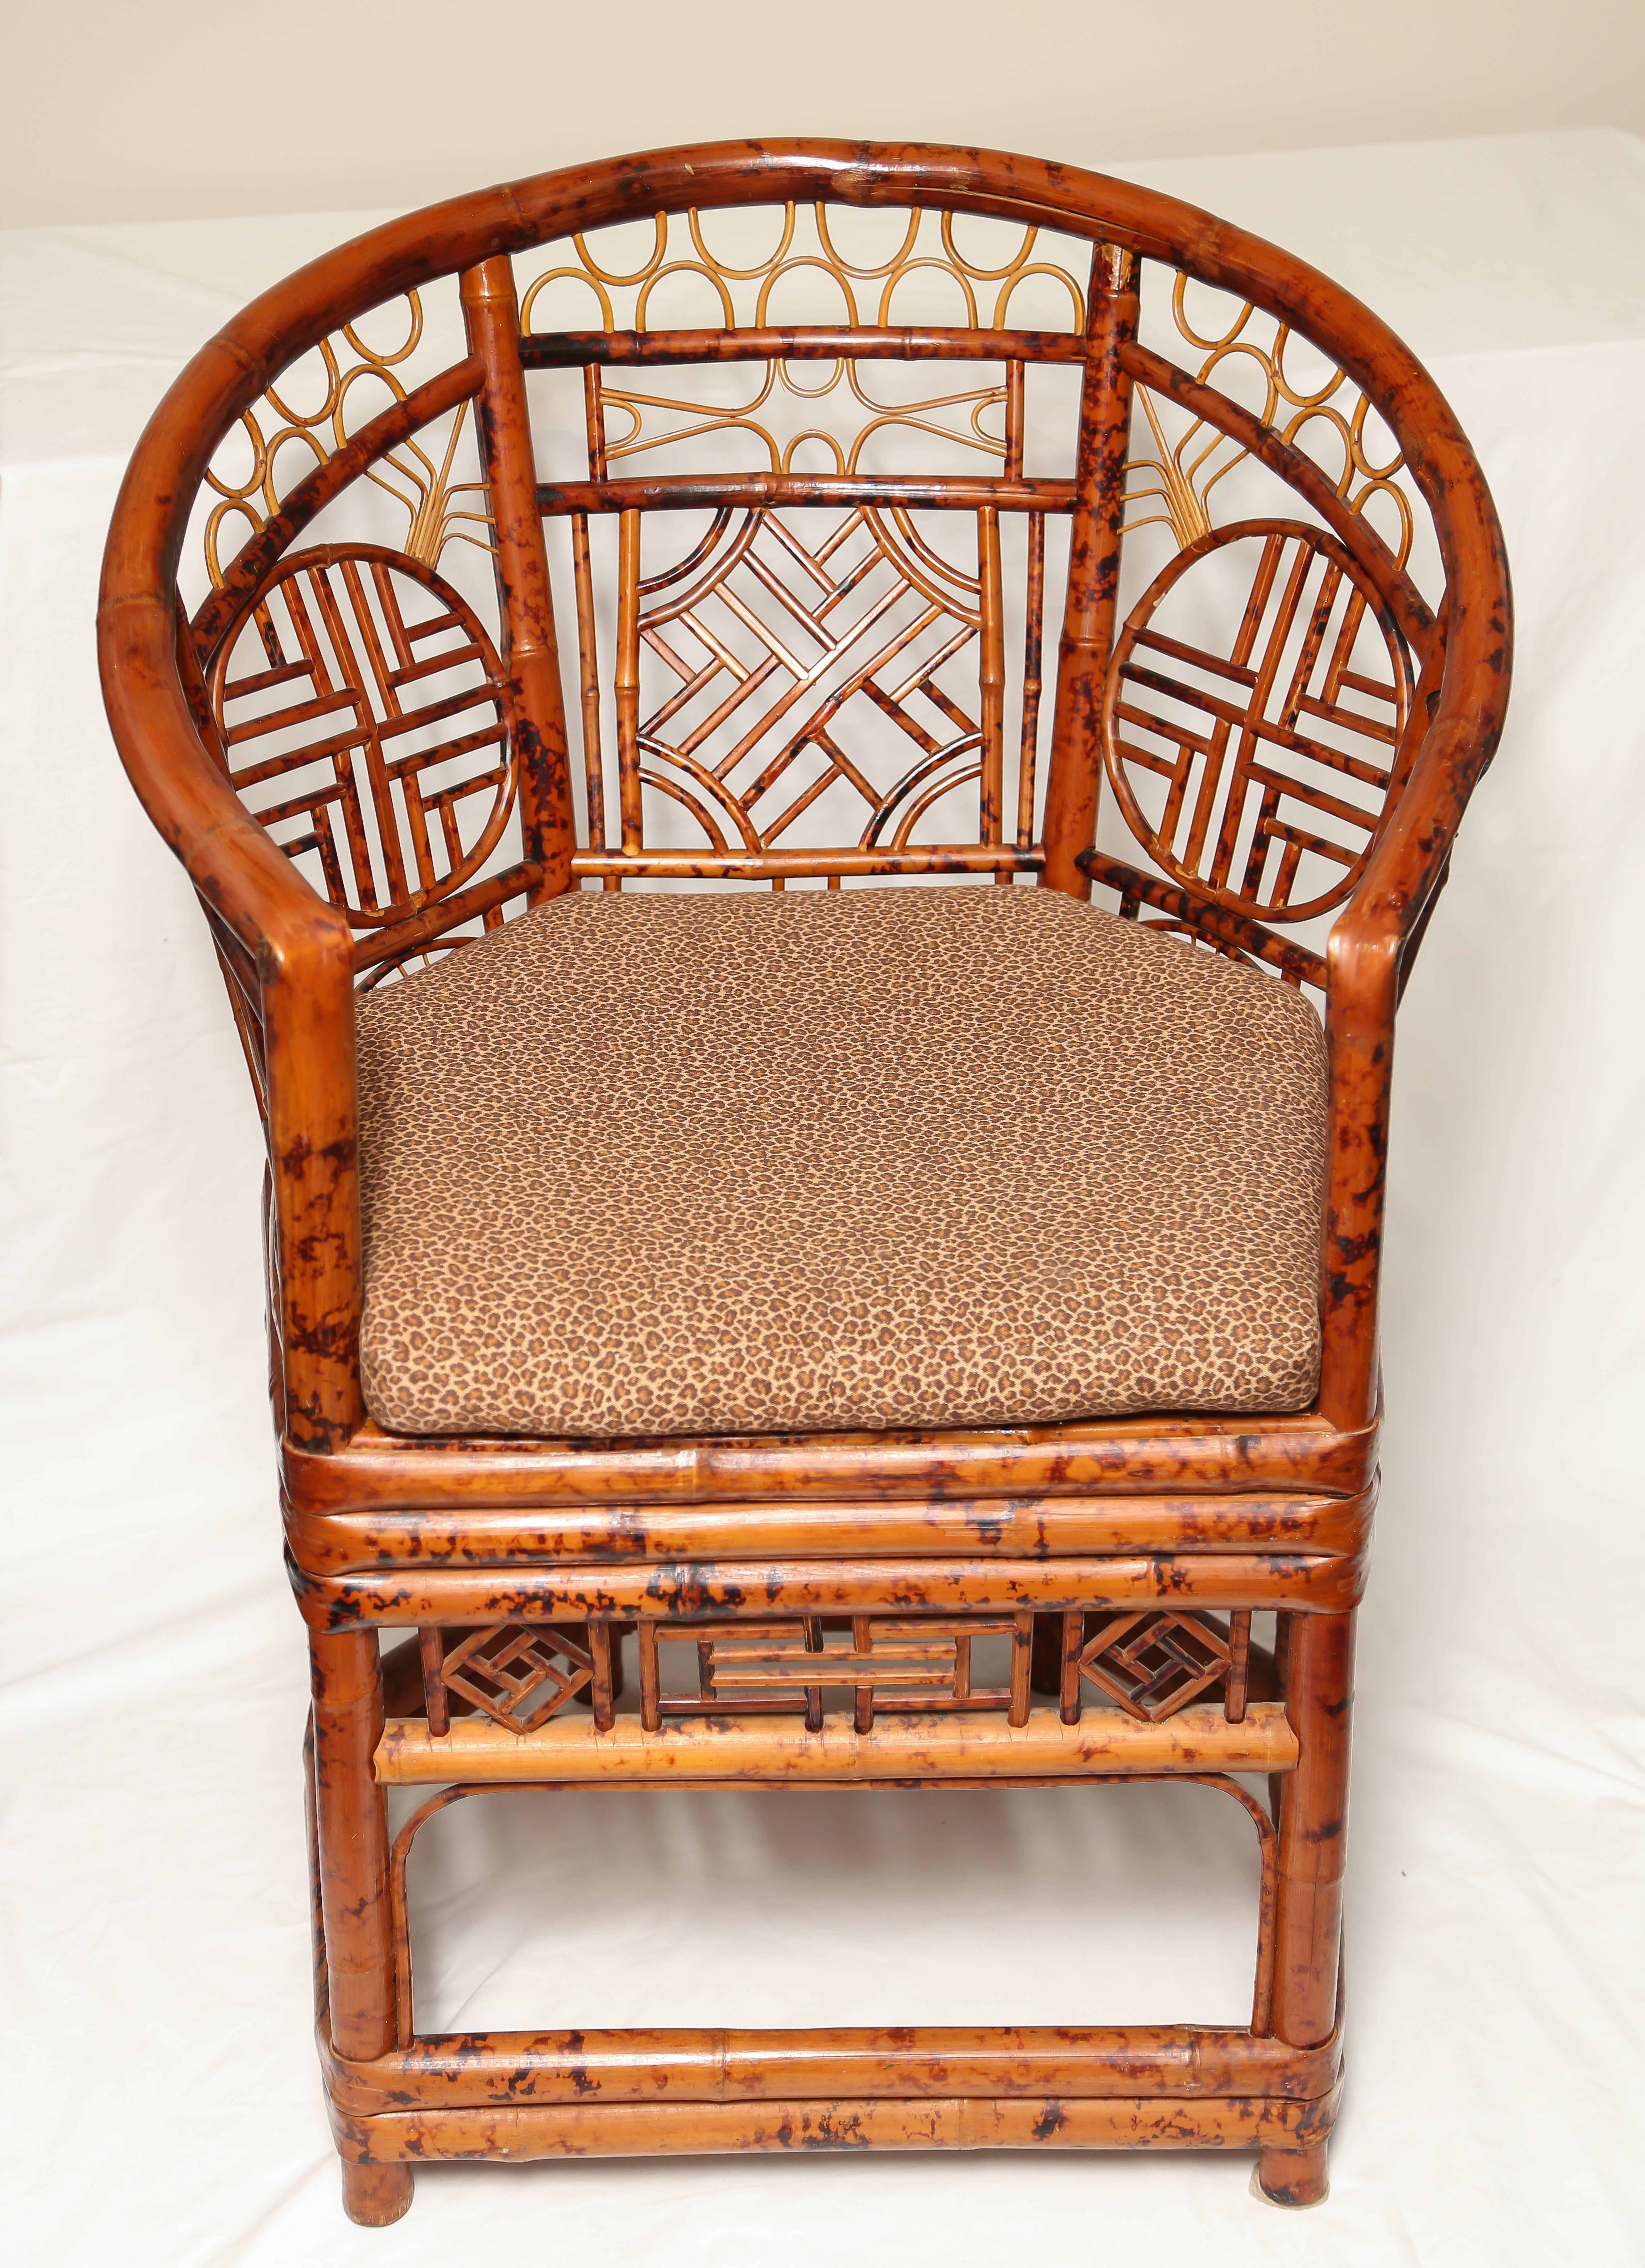 A generously scaled and elaborate pair of chairs intricate bamboo and reed design. Measures: Seat height is 21" with cushions.